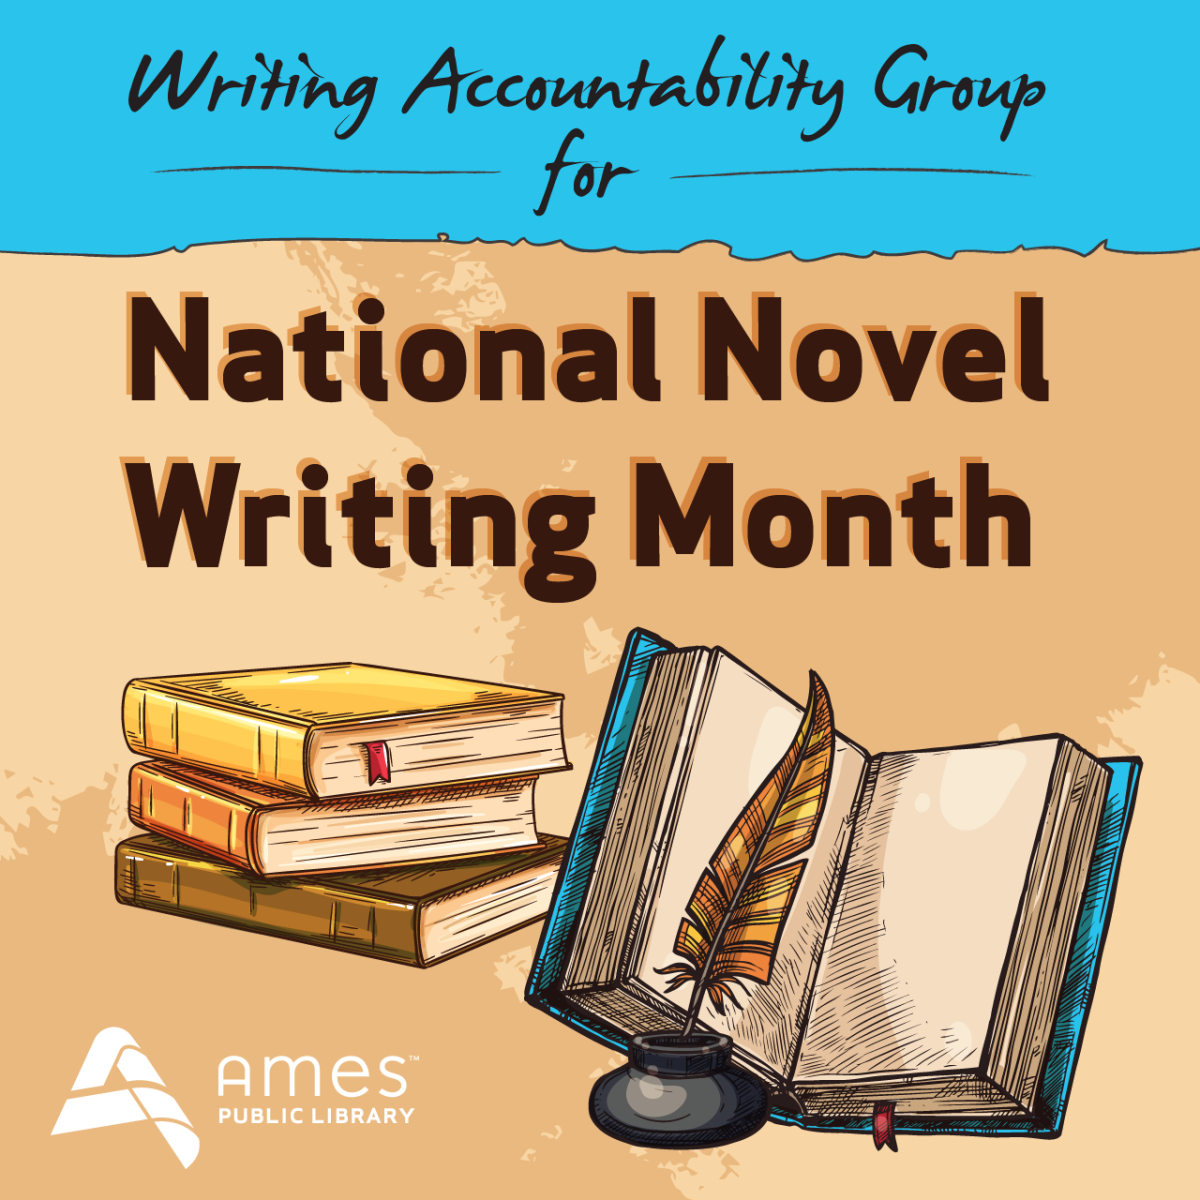 Writing Accountability Group for National Novel Writing Month